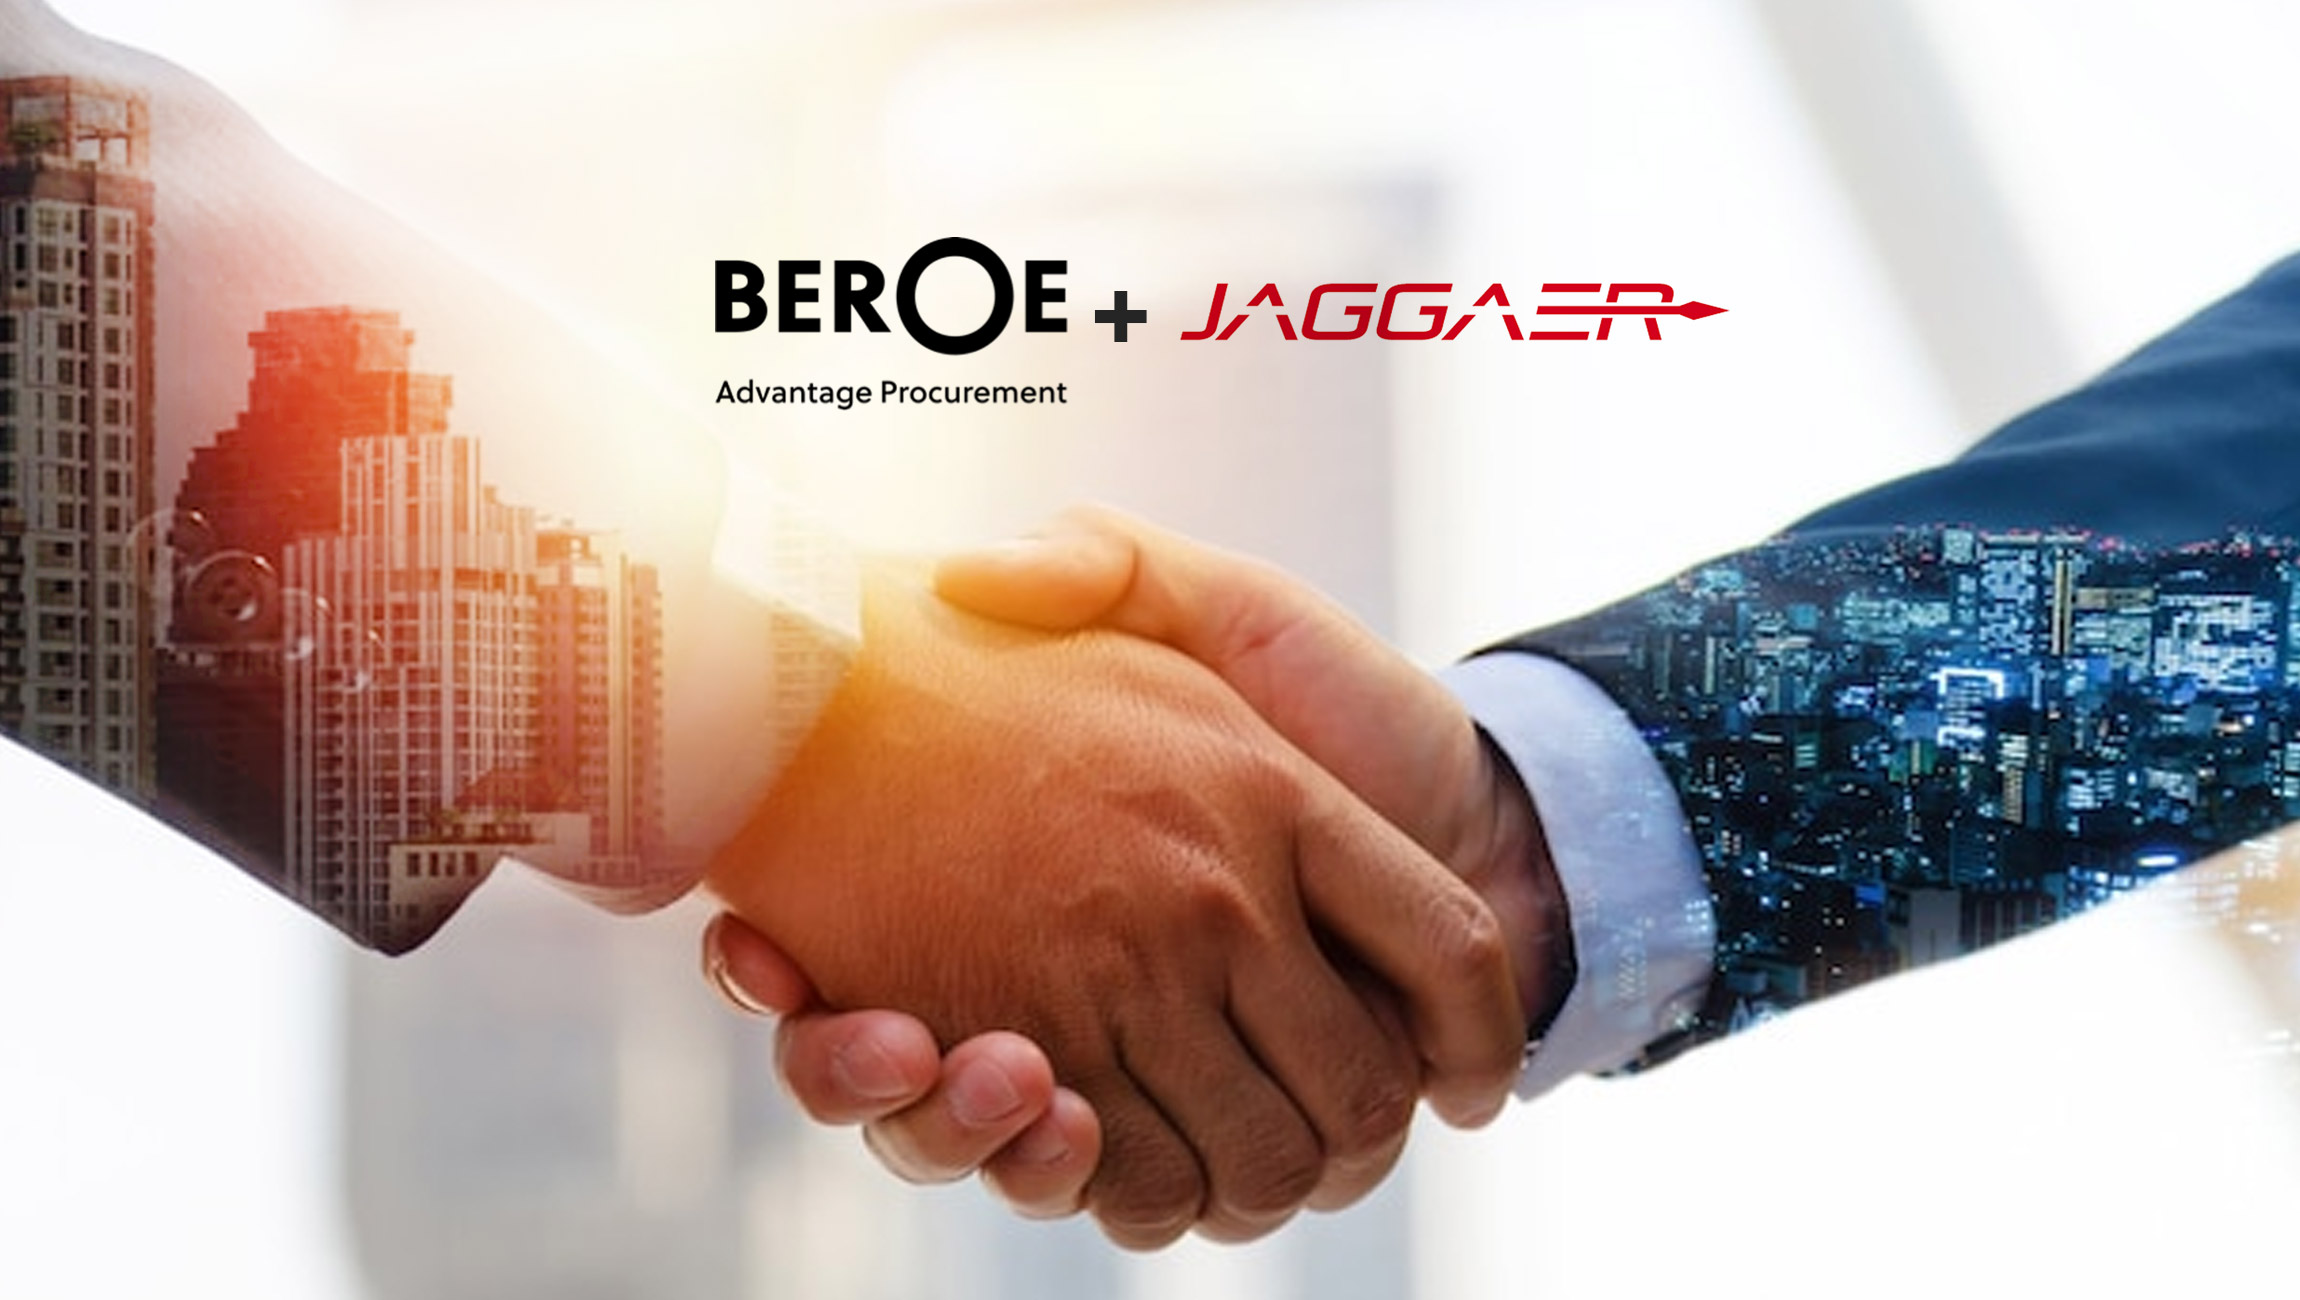 Beroe Partners With JAGGAER To Enable Smarter Sourcing Decisions Backed by Category and Supplier Intelligence